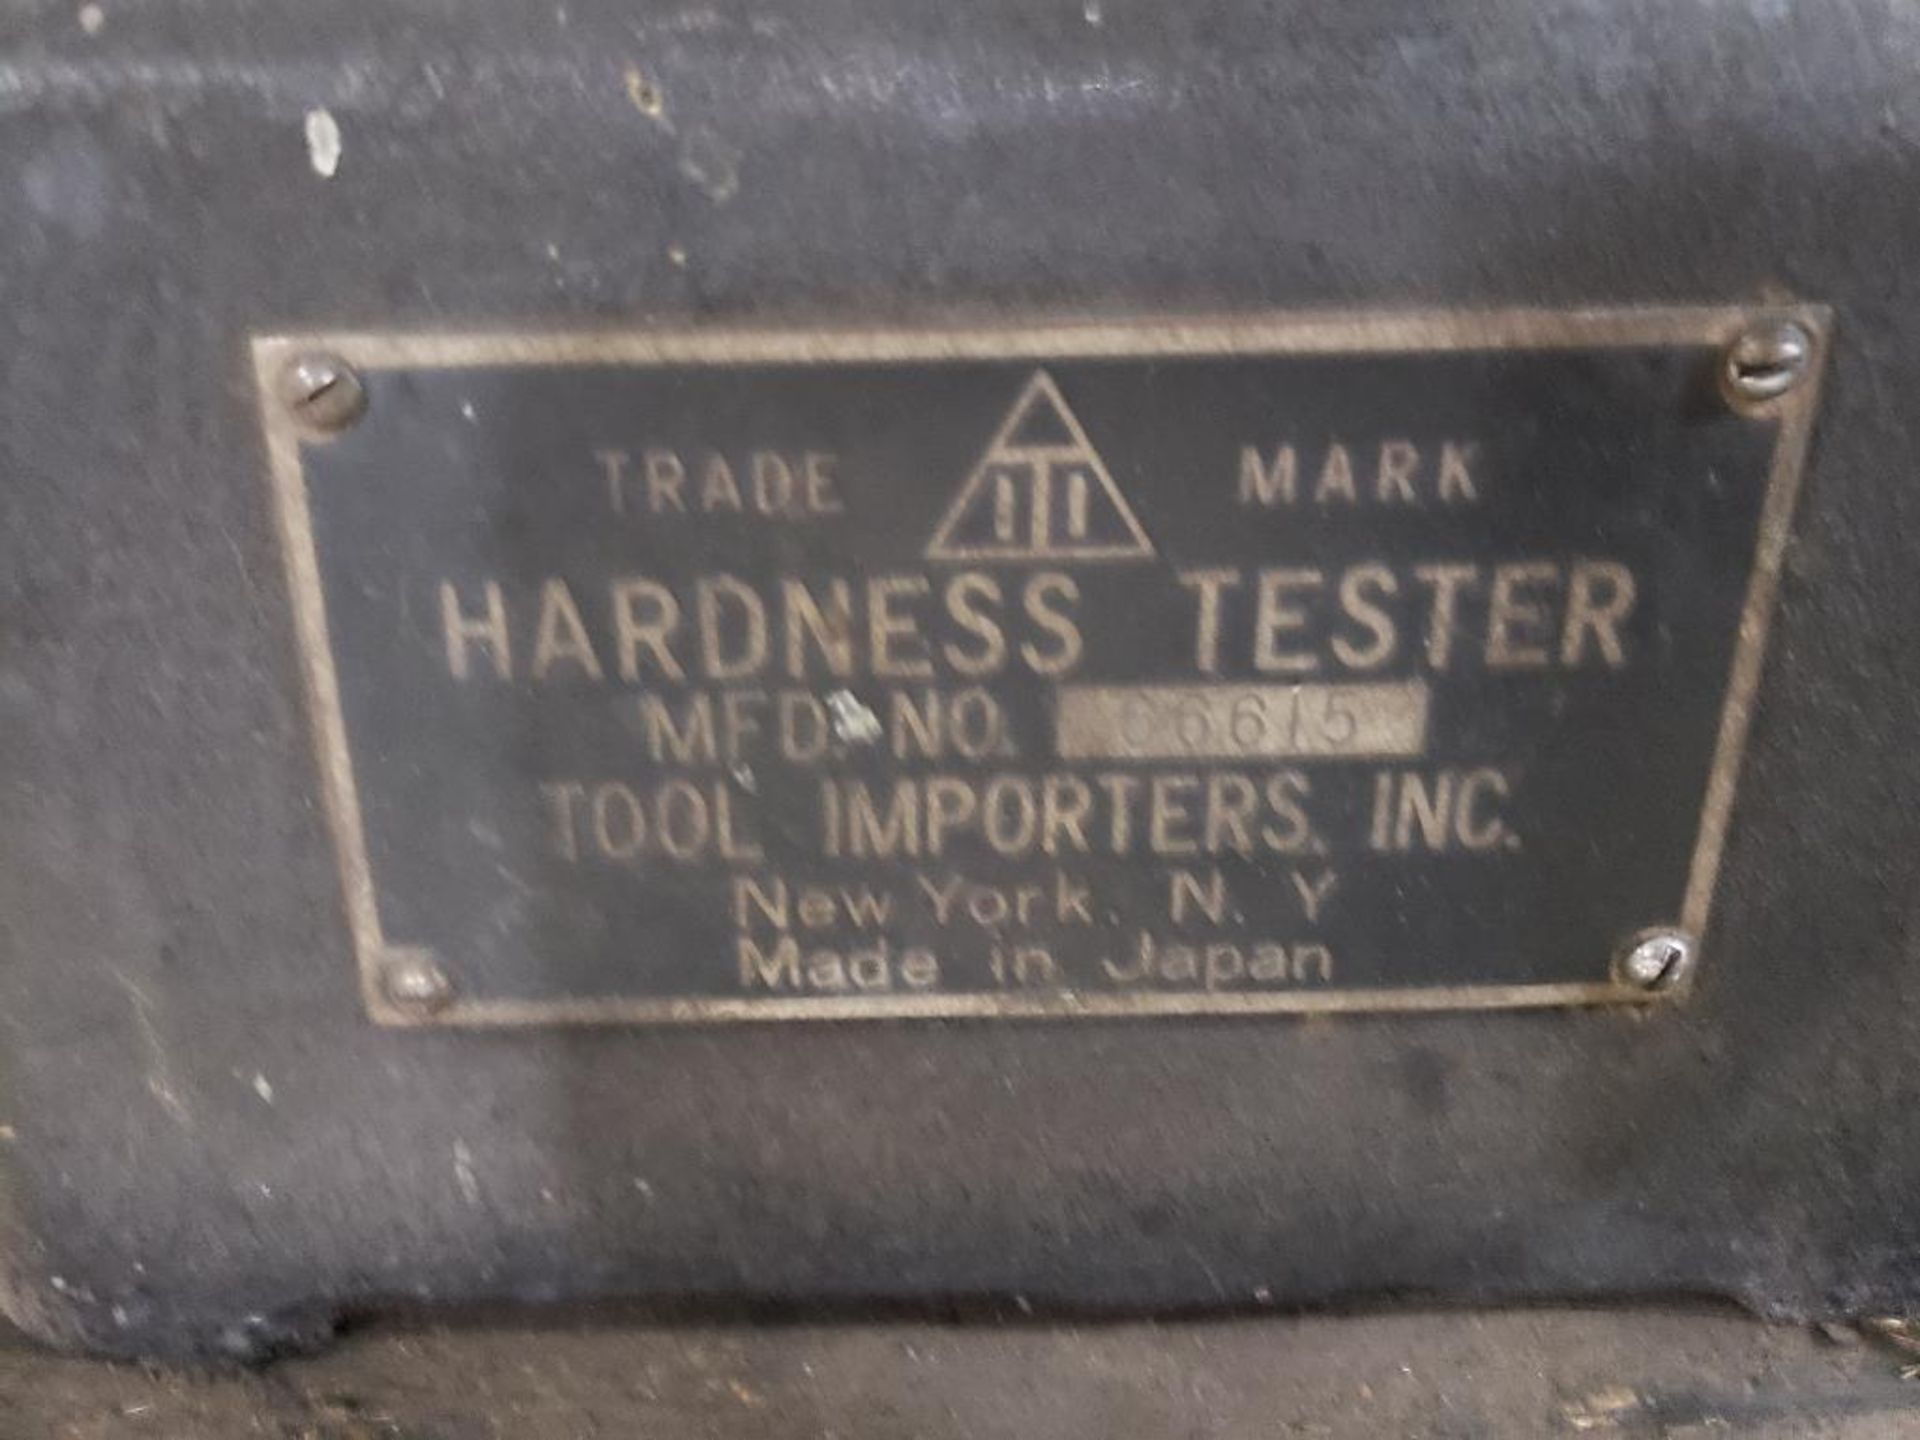 Trade Mark Tool Importers Hardness Tester 66615. - Image 2 of 8